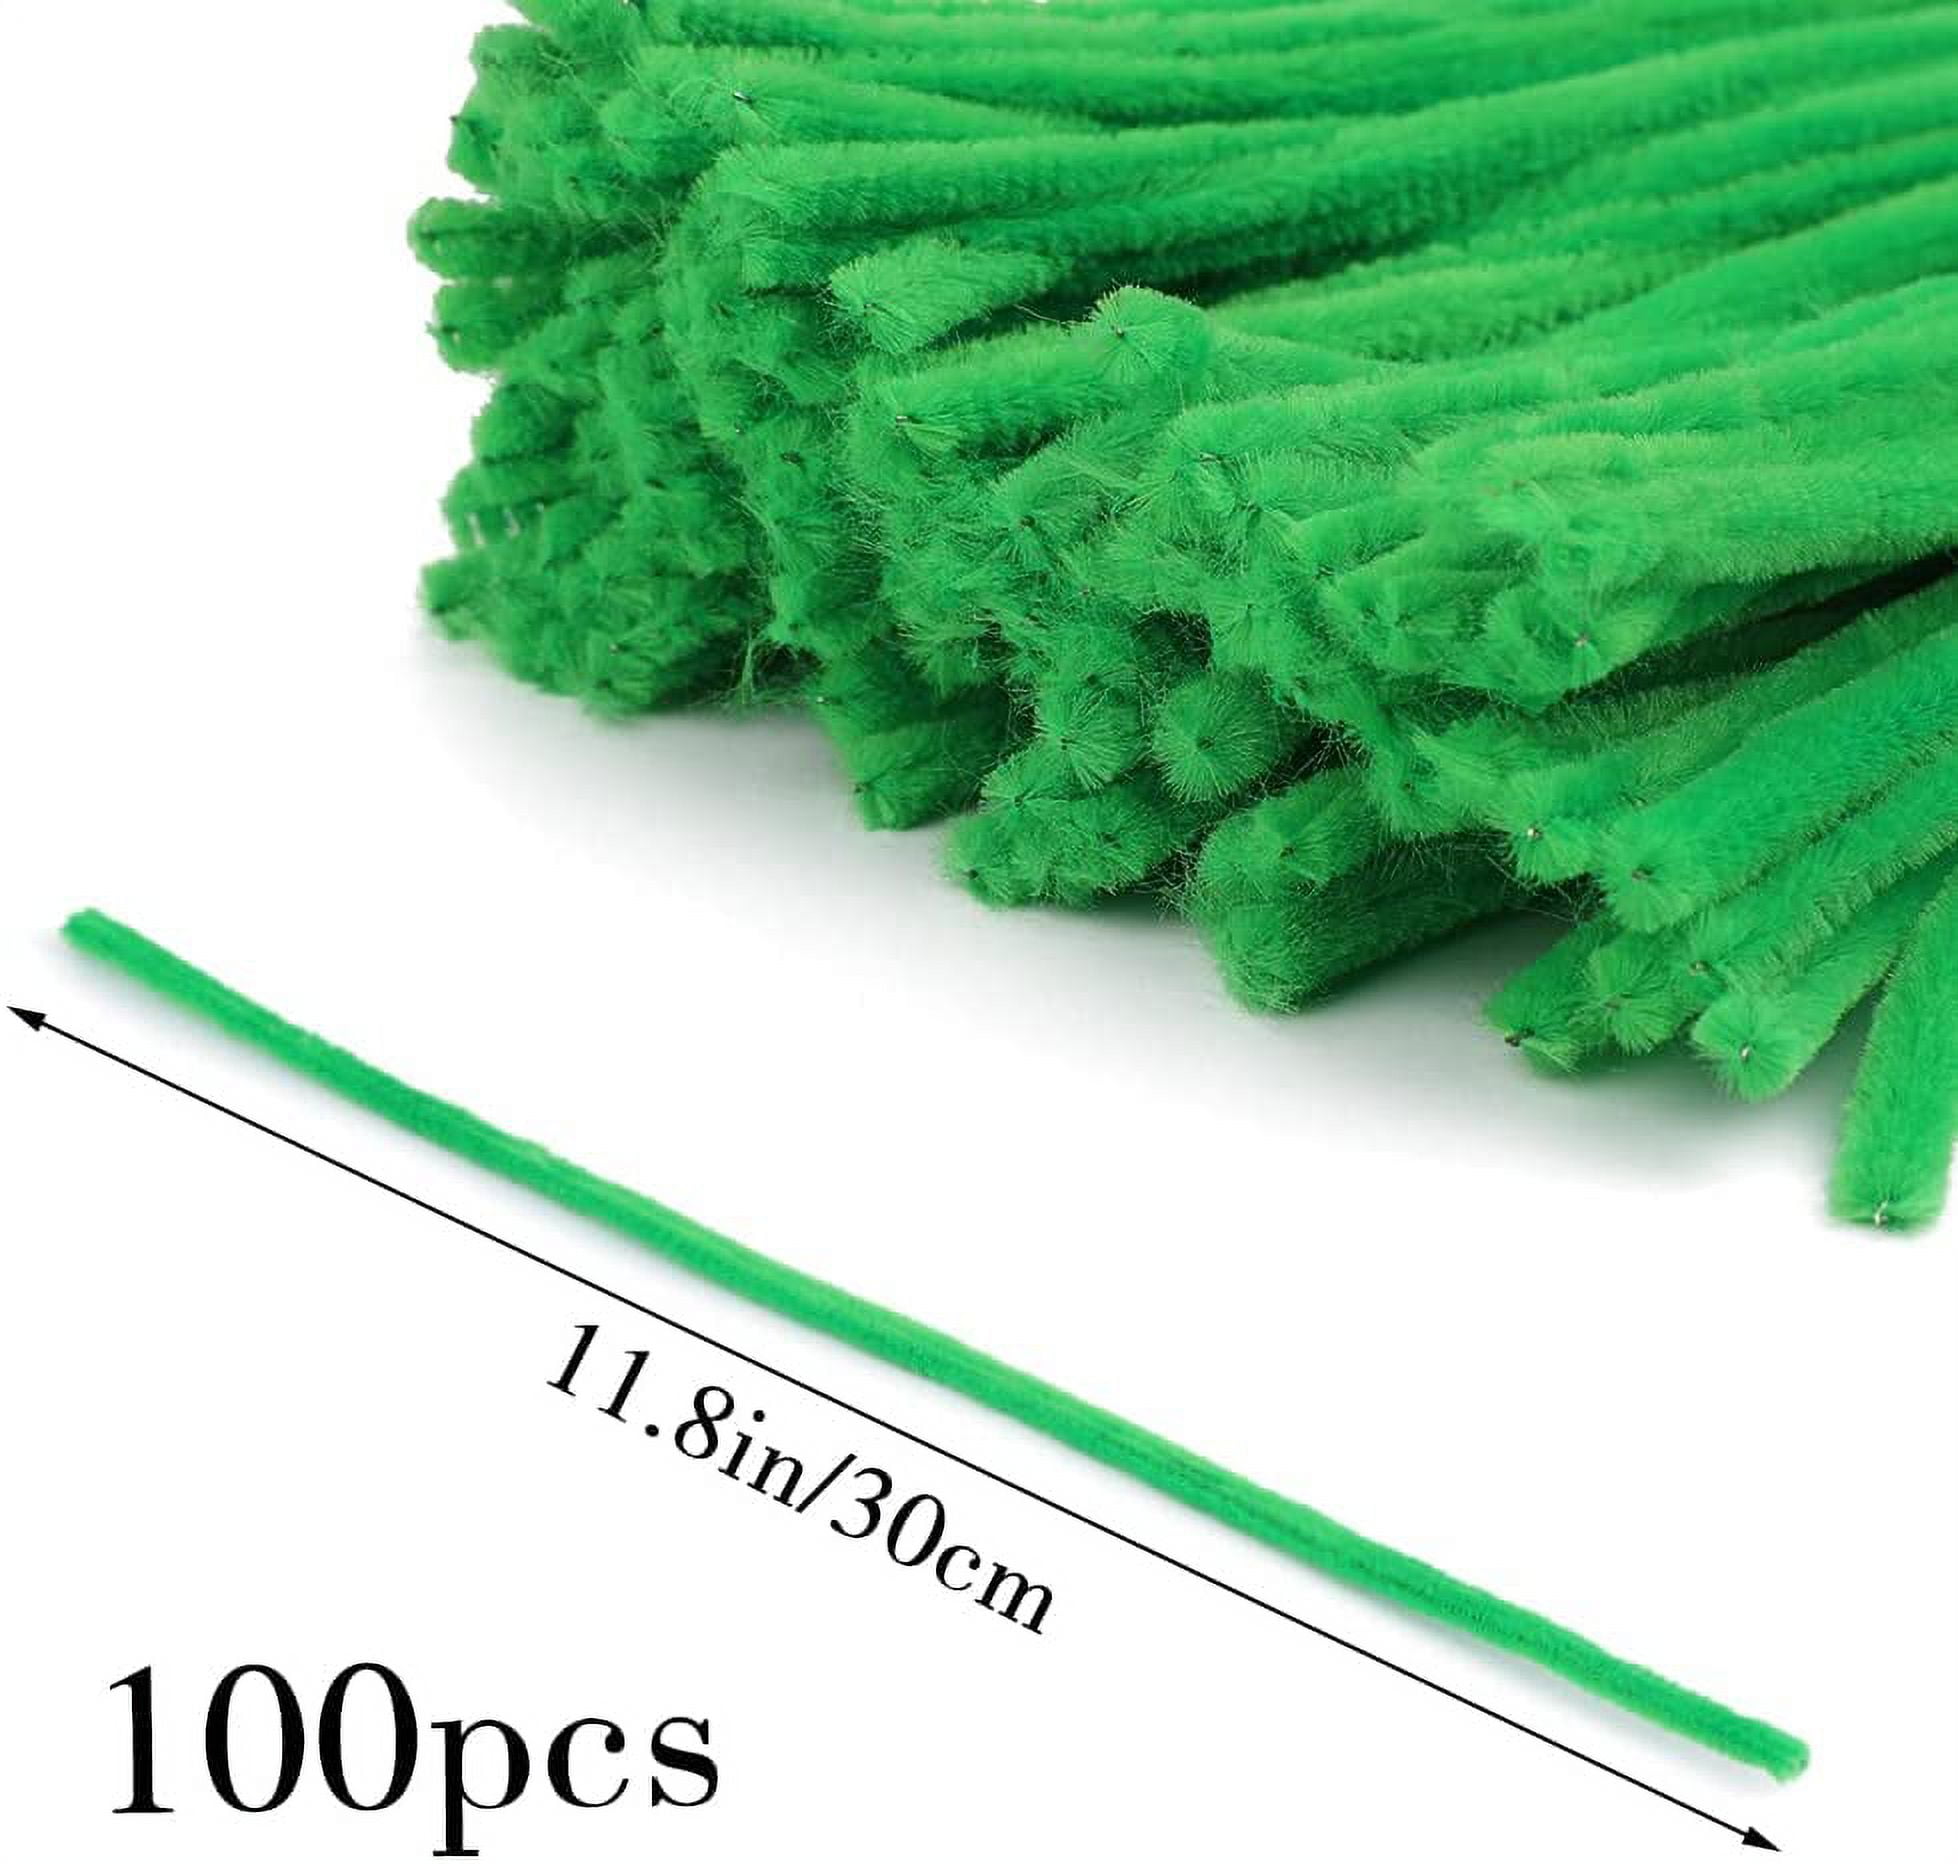 Chenille stems Pipe cleaners green emerald 12 inch long crafts